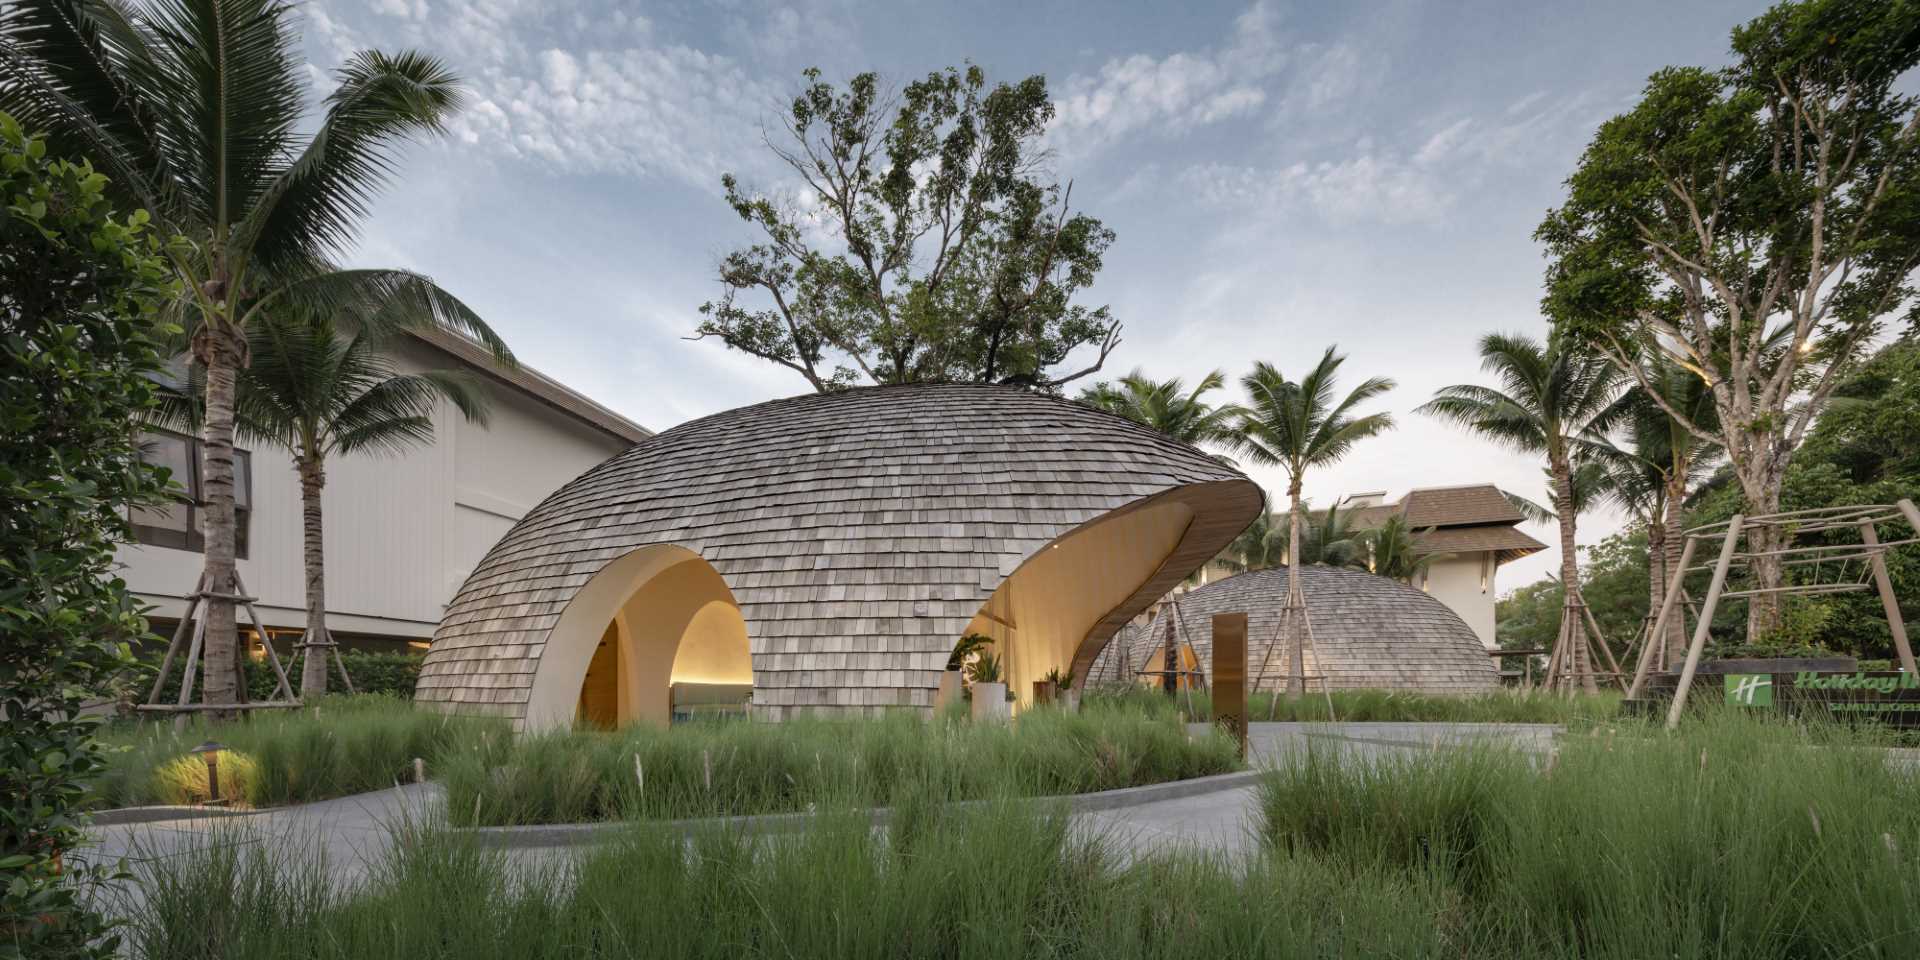 A modern hotel lobby whose design is inspired by the shape and interior of a coconut, and features a shingle-clad exterior.